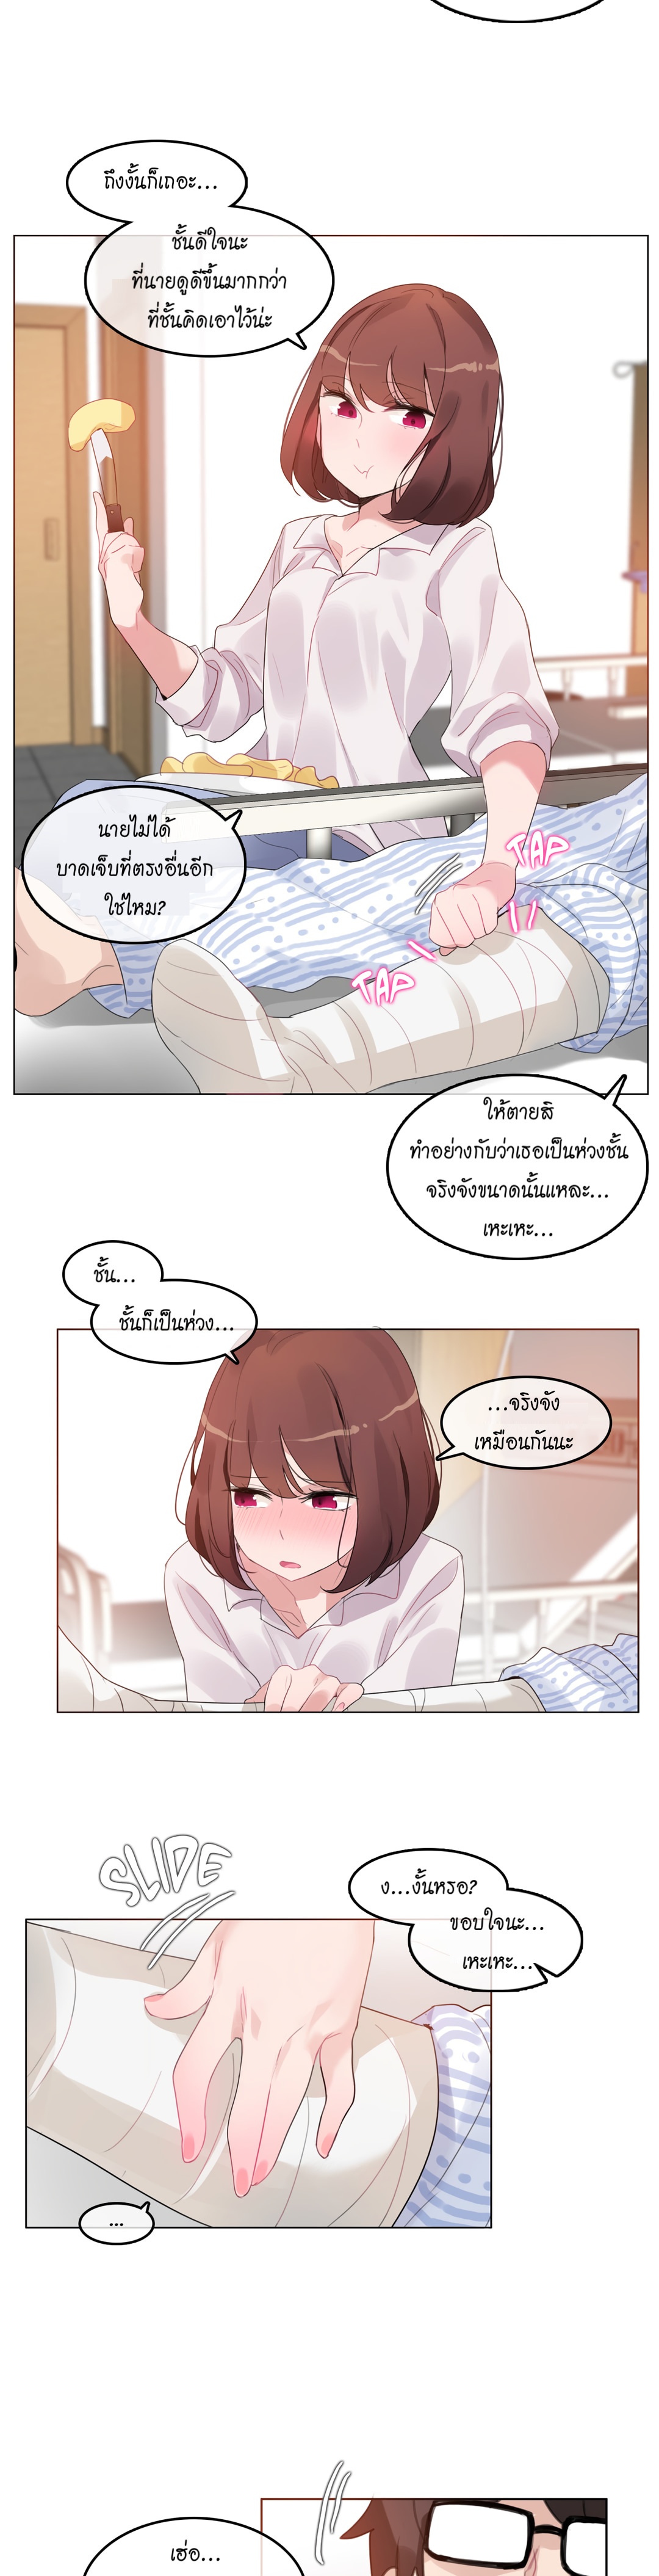 A Pervert’s Daily Life 46 15